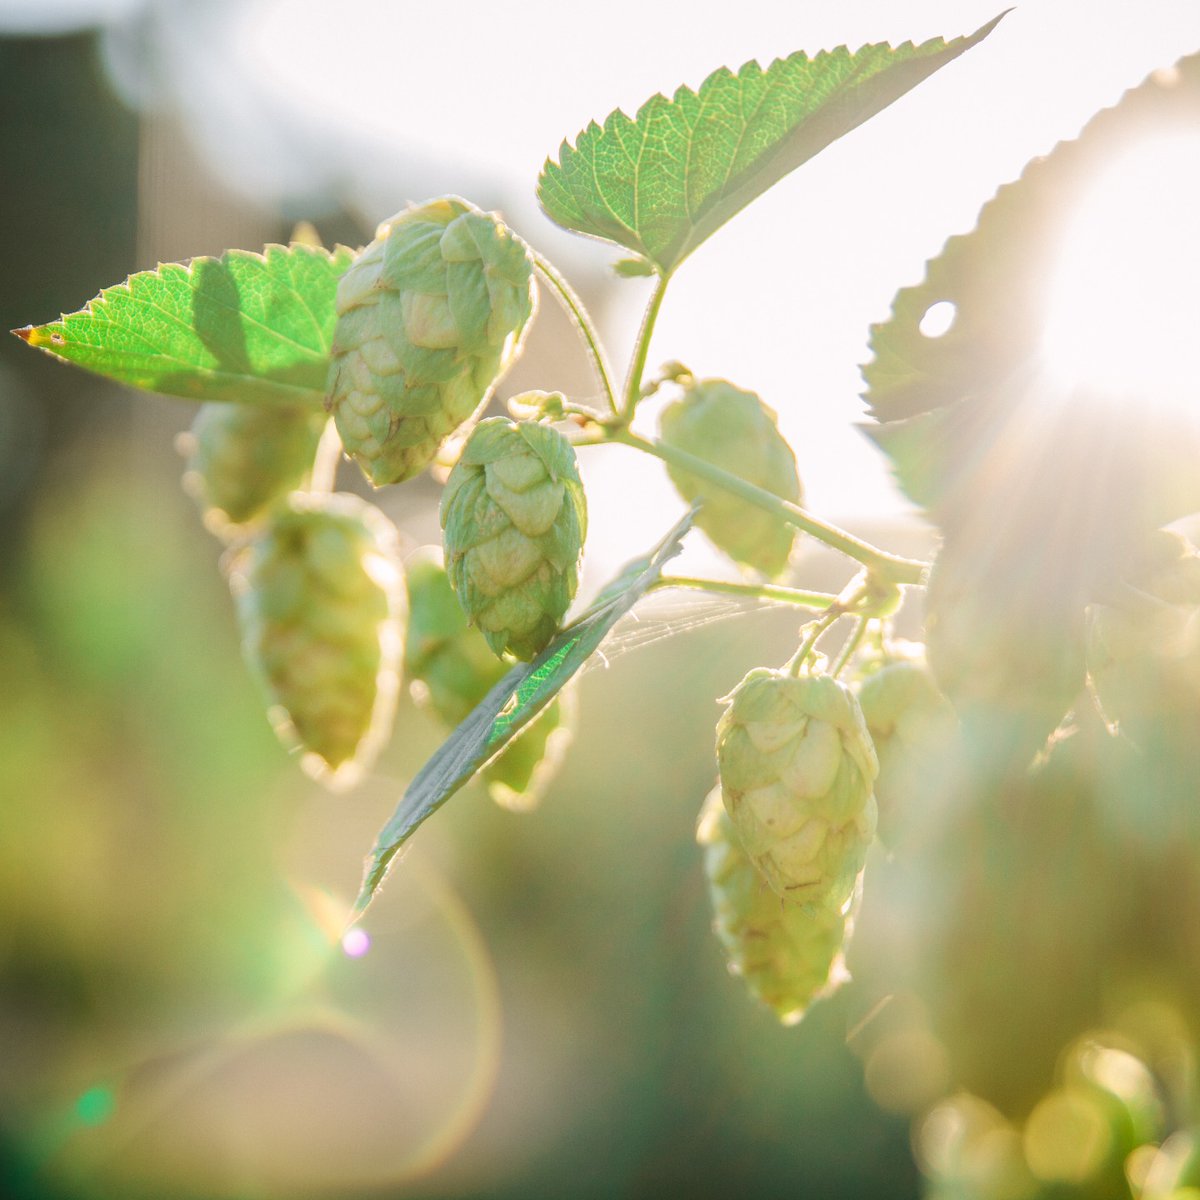 Don't mind us, just using #InternationalPlantAppreciationDay as an excuse to post our favorite flora. FUN FACT: hops are actually flowers. We'd take these magical little Humulus lupulus cones over roses any day.